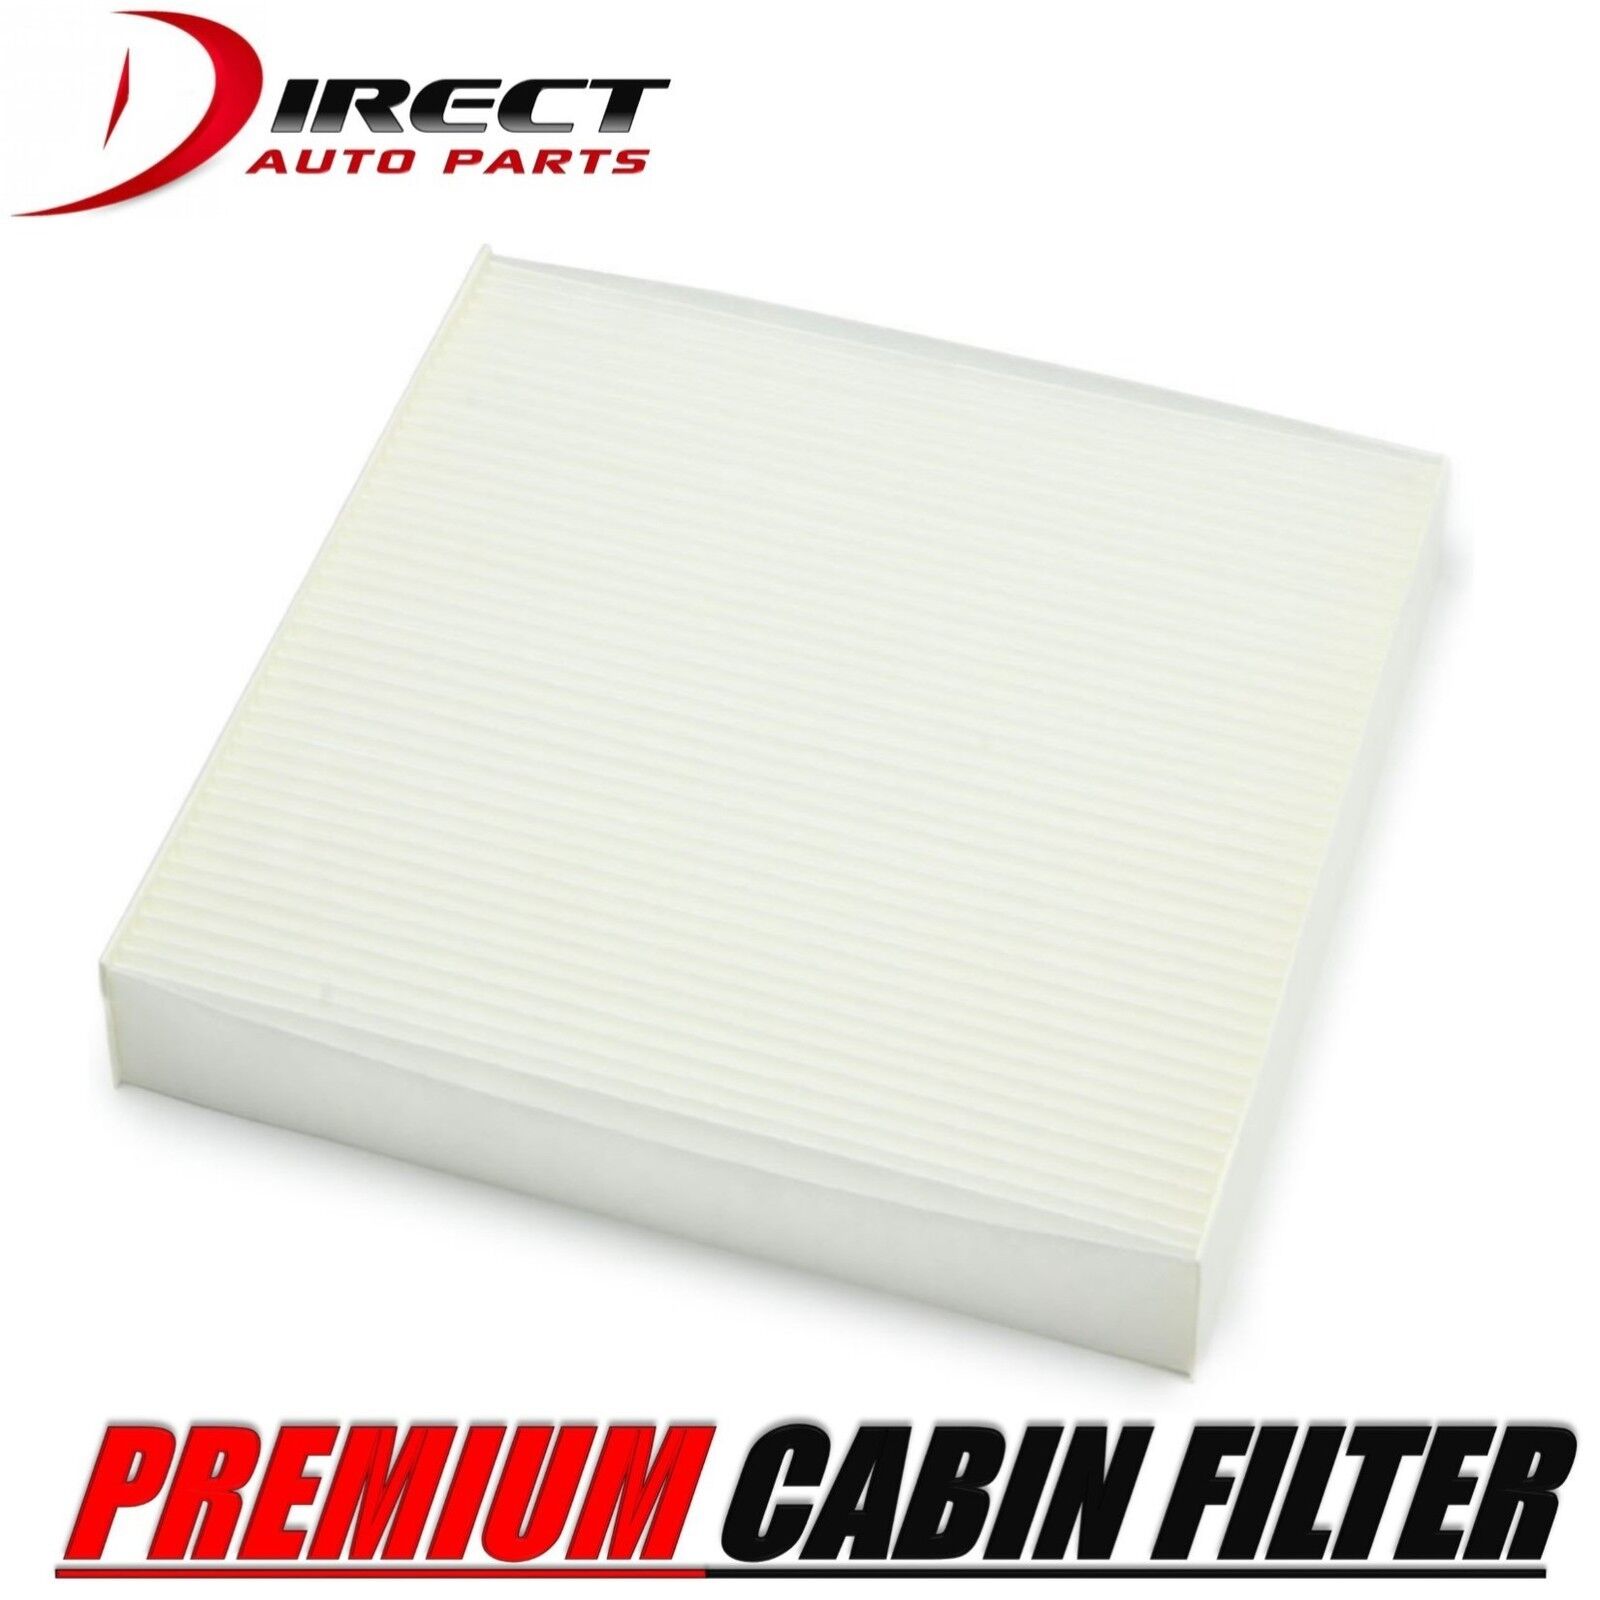 C35667 CABIN AIR FILTER FOR TOYOTA COROLLA 2009 - 2016